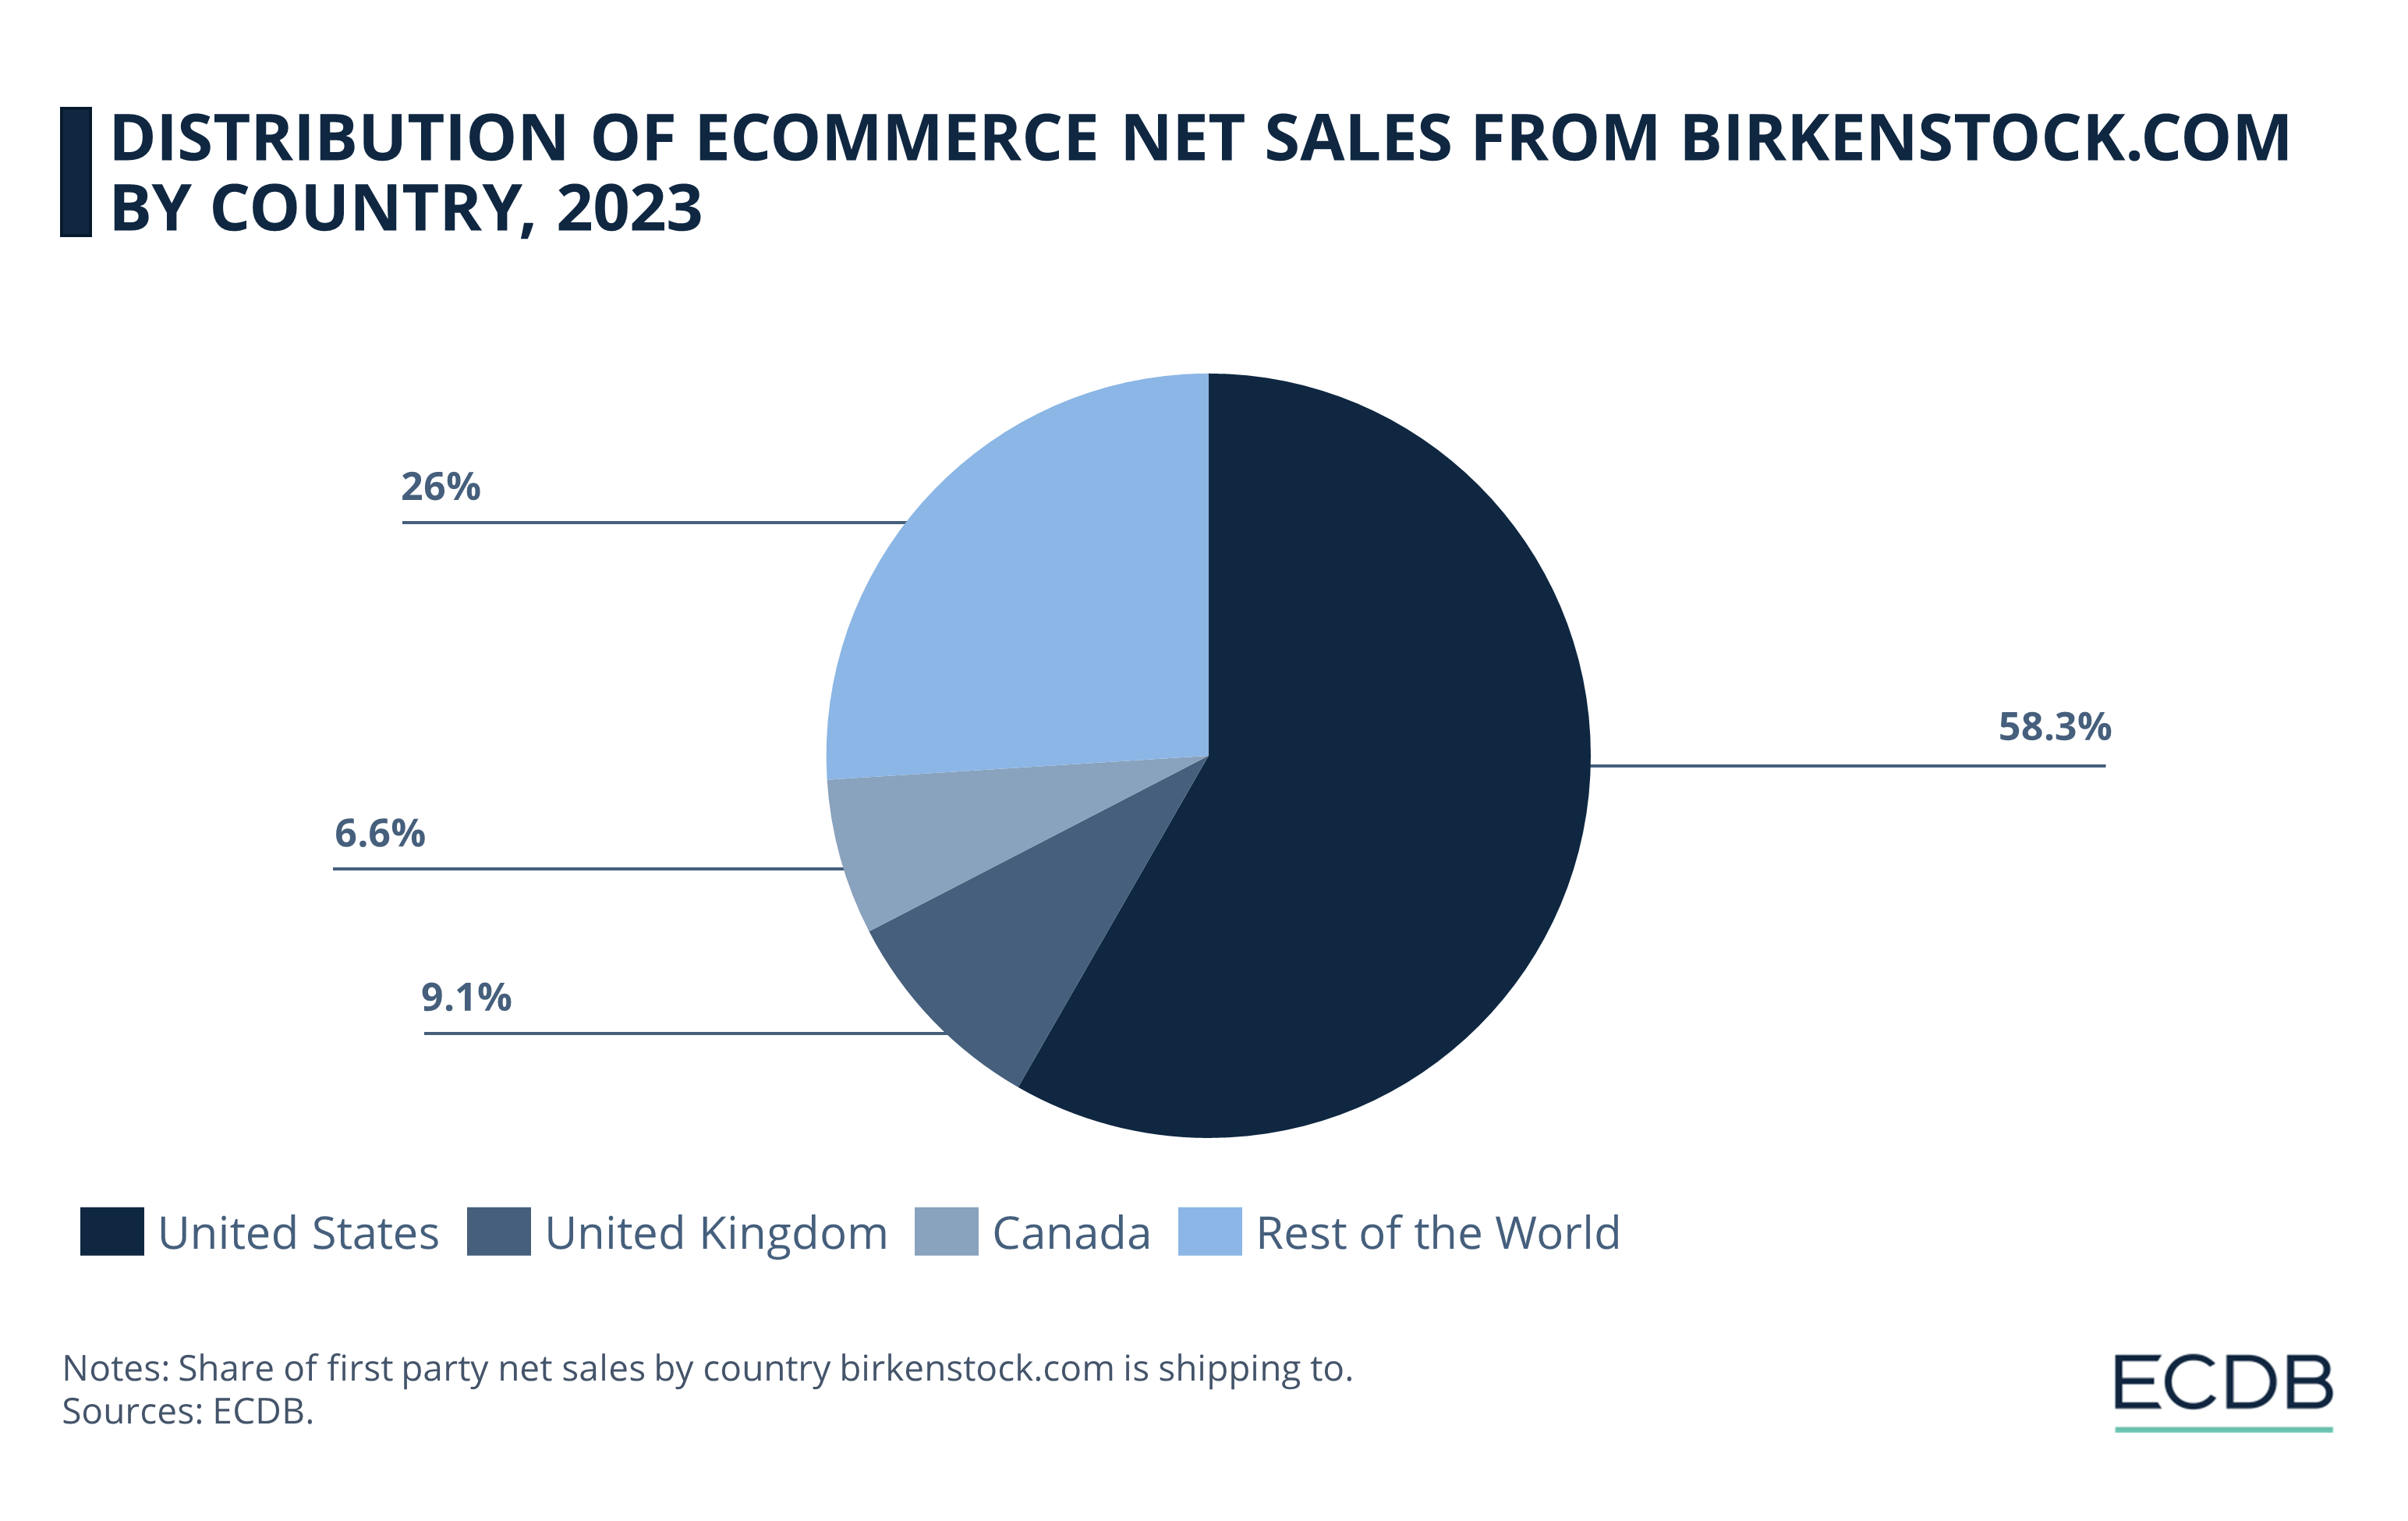 Distribution of eCommerce Net Sales From Birkenstock.com by Country, 2022